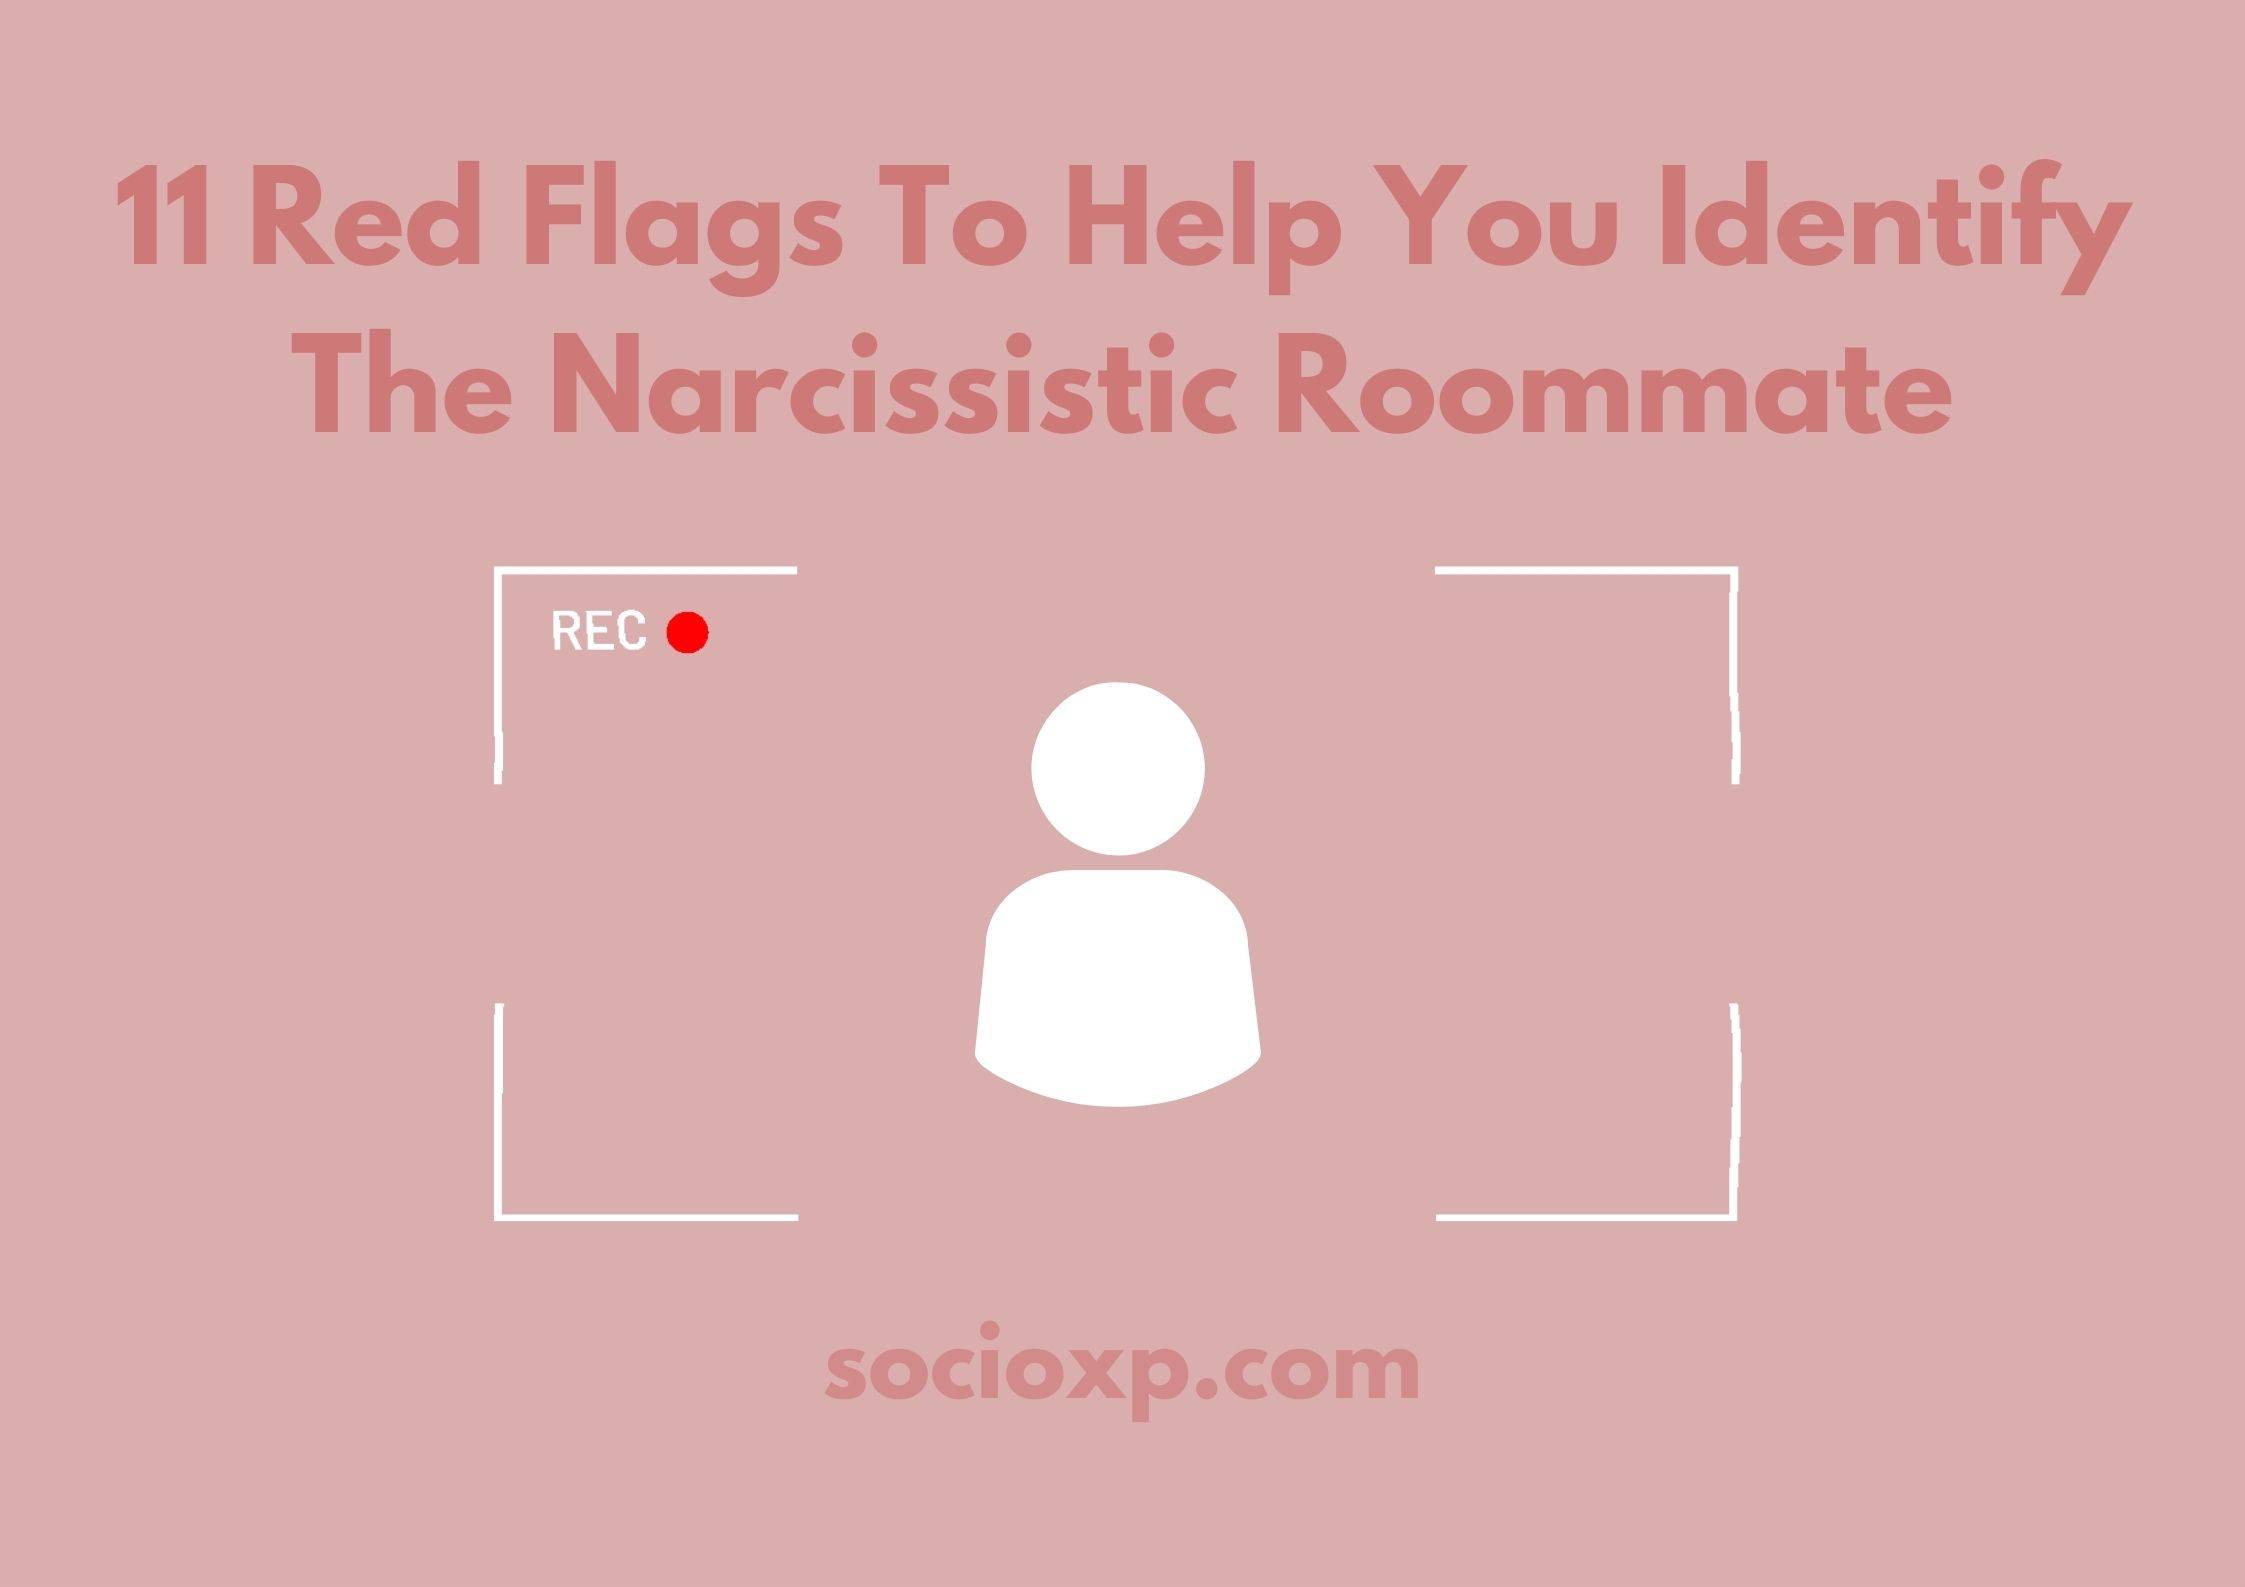 11 Red Flags To Help You Identify The Narcissistic Roommate